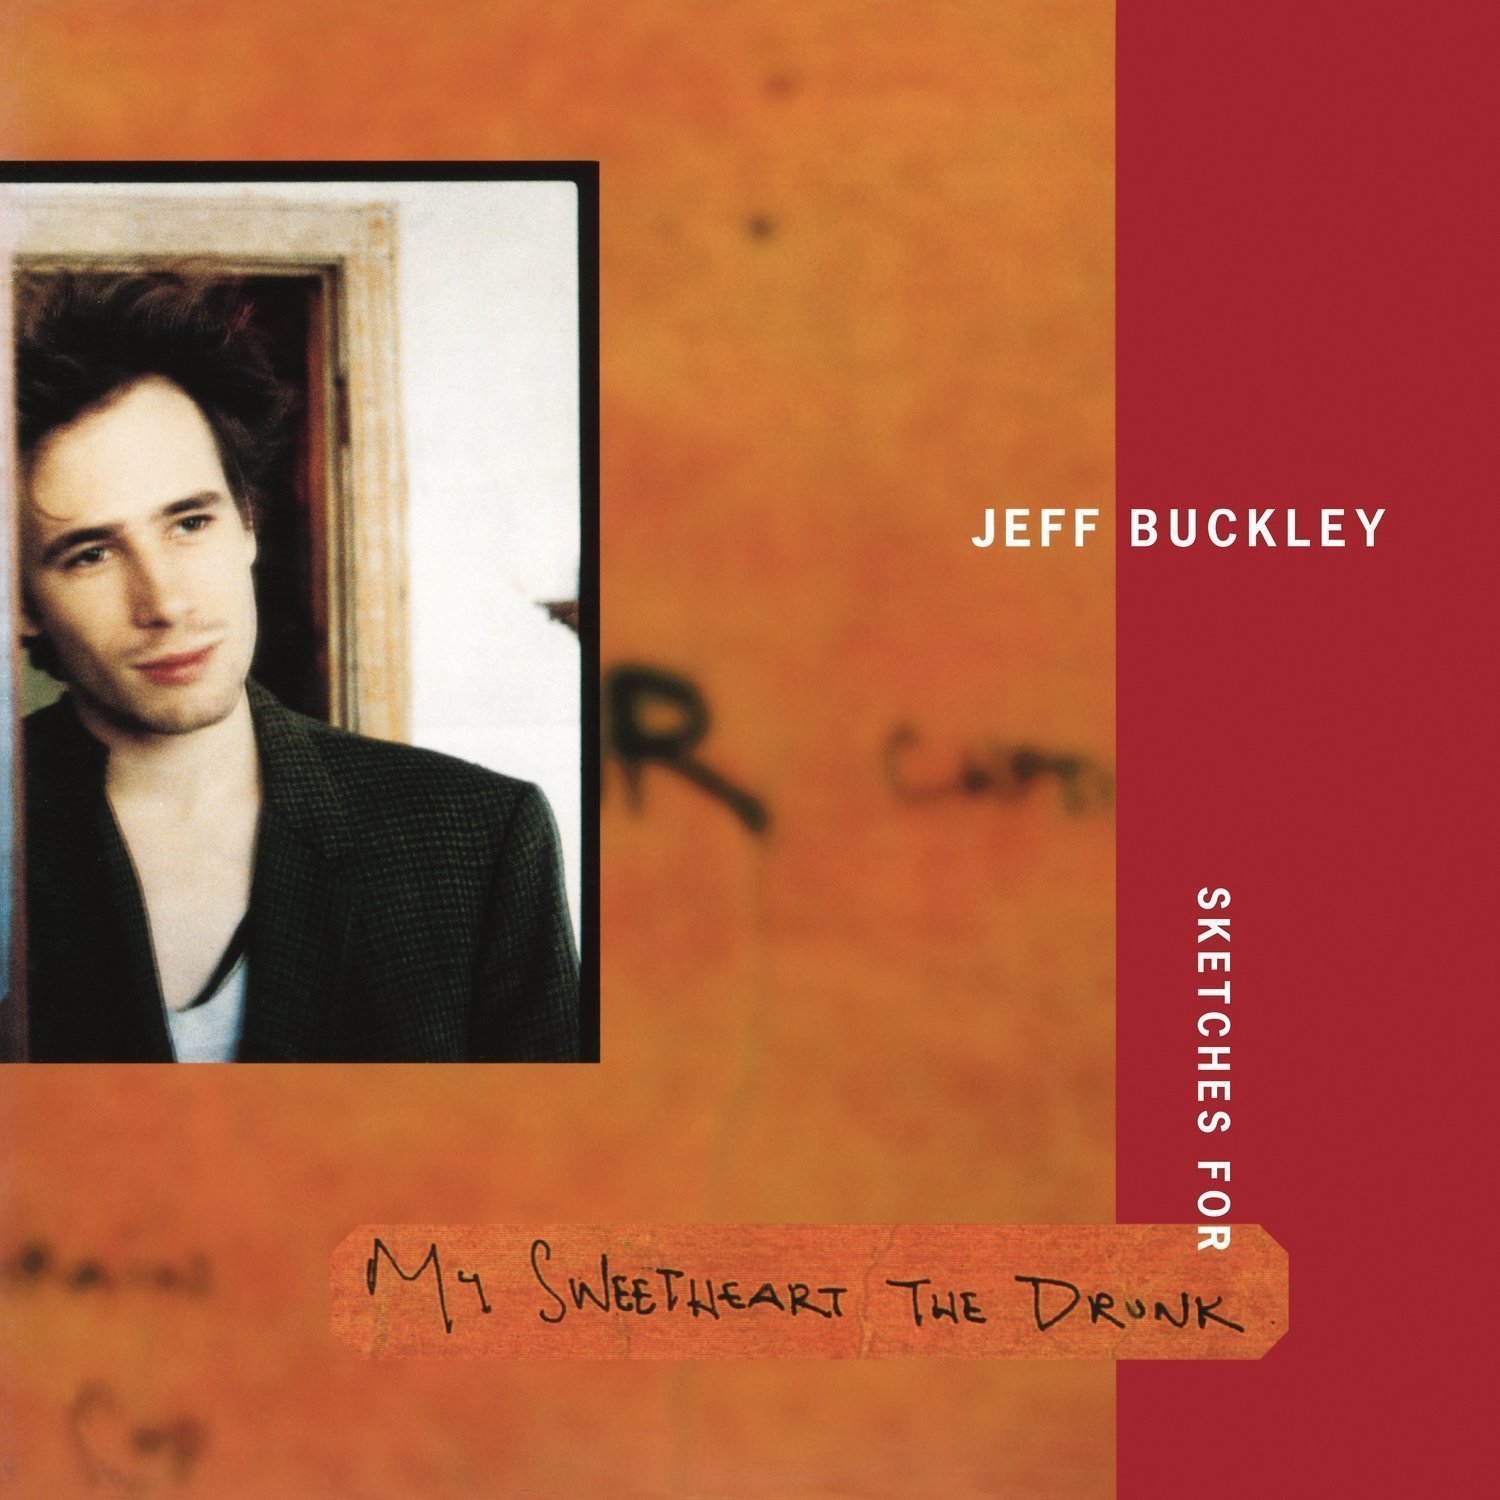 Vinyl Record Jeff Buckley Sketches For My Sweetheart the Drunk (3 LP)